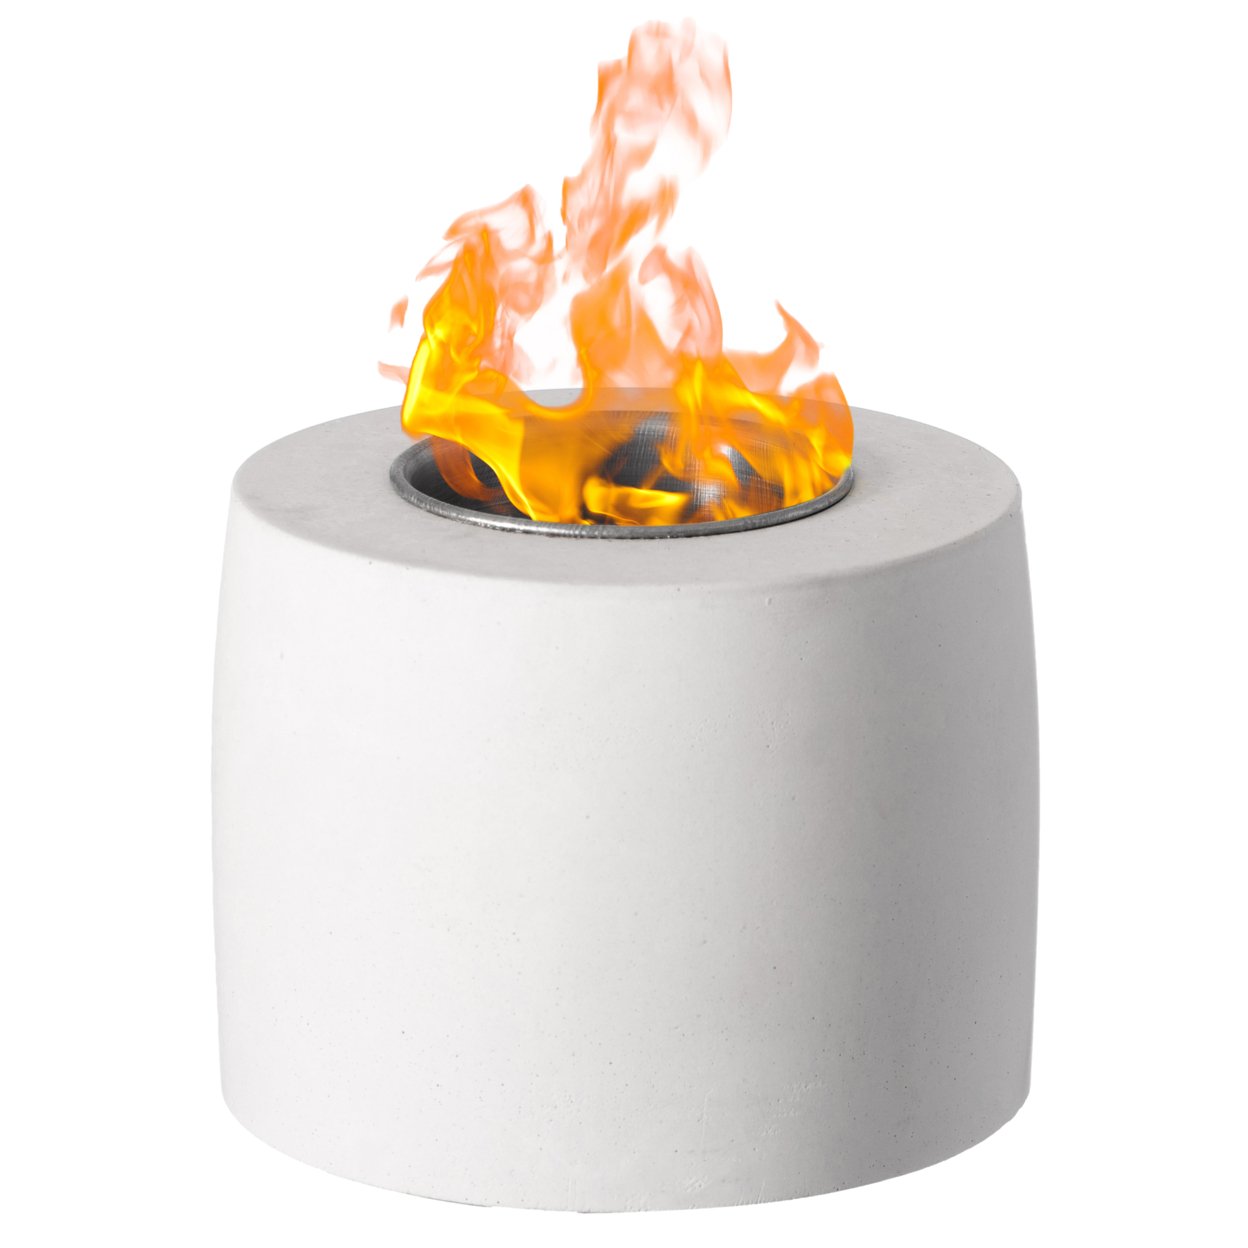 Mini Tabletop Fire Pit Rubbing Alcohol Fireplace Indoor Outdoor Portable Fire Concrete Bowl Pot Fireplace - Low Glass